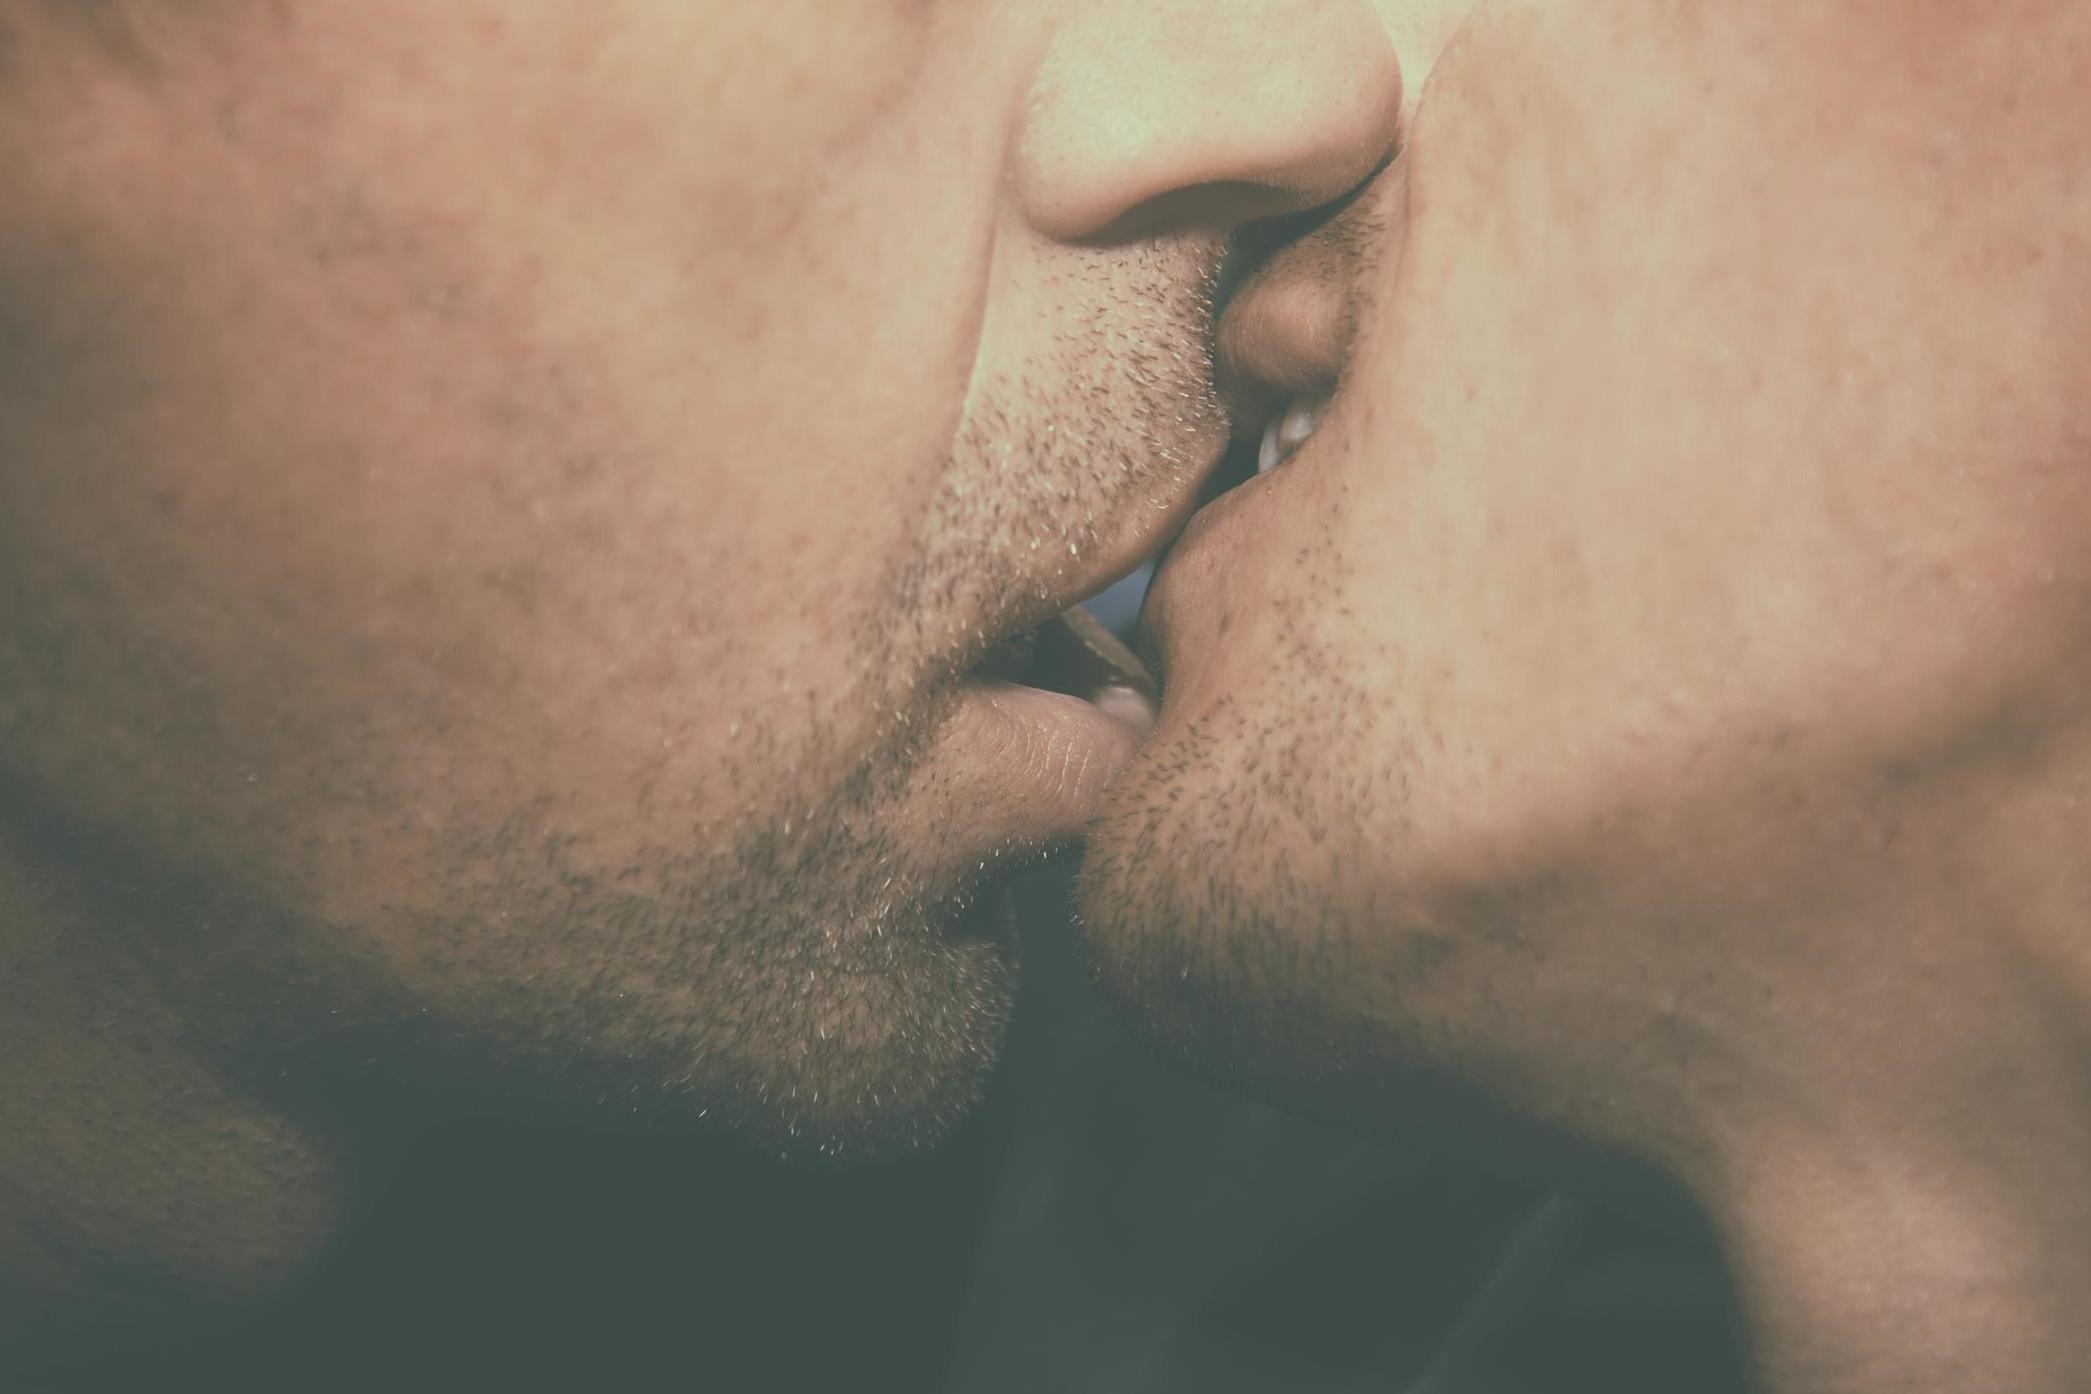 French kissing could be unexplored cause of throat gonorrhea | The ...